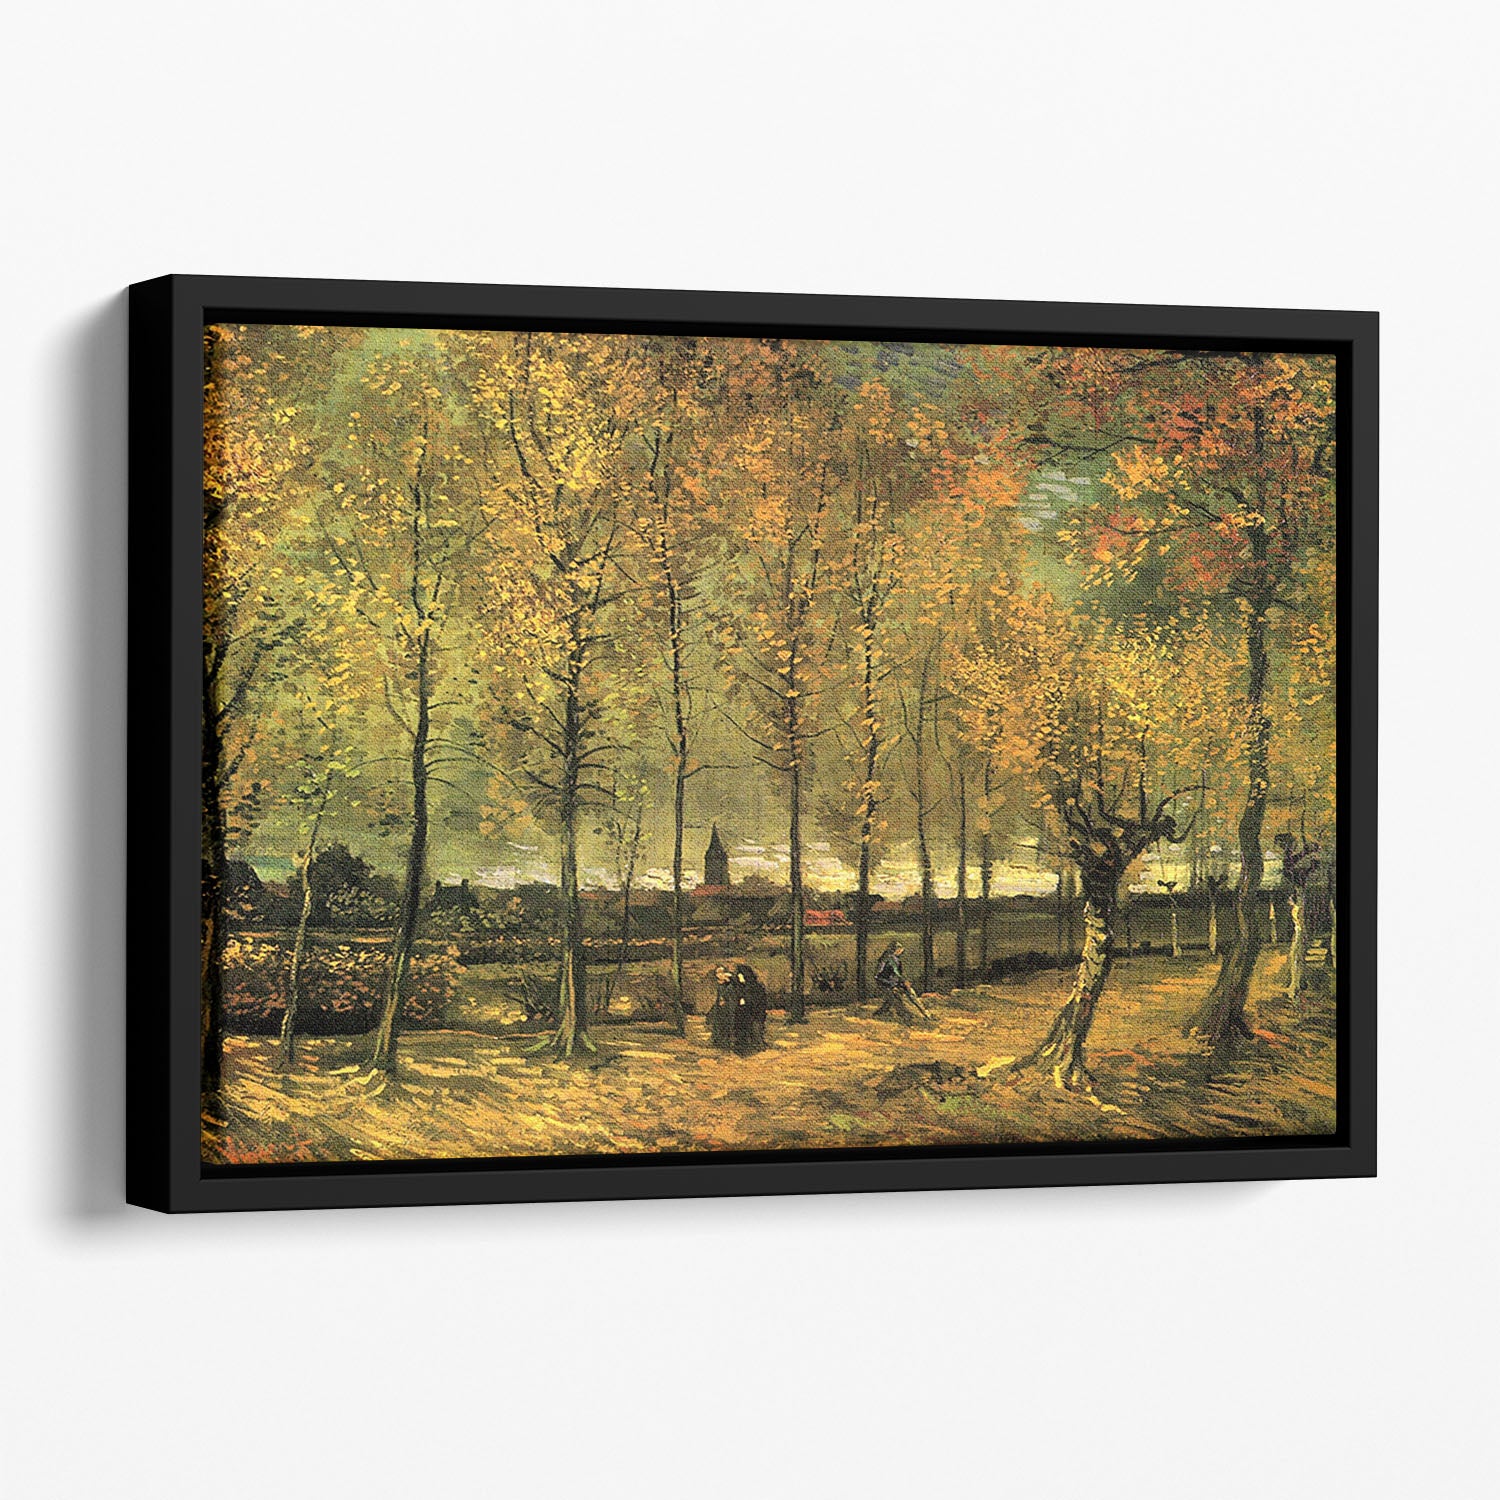 Lane with Poplars by Van Gogh Floating Framed Canvas